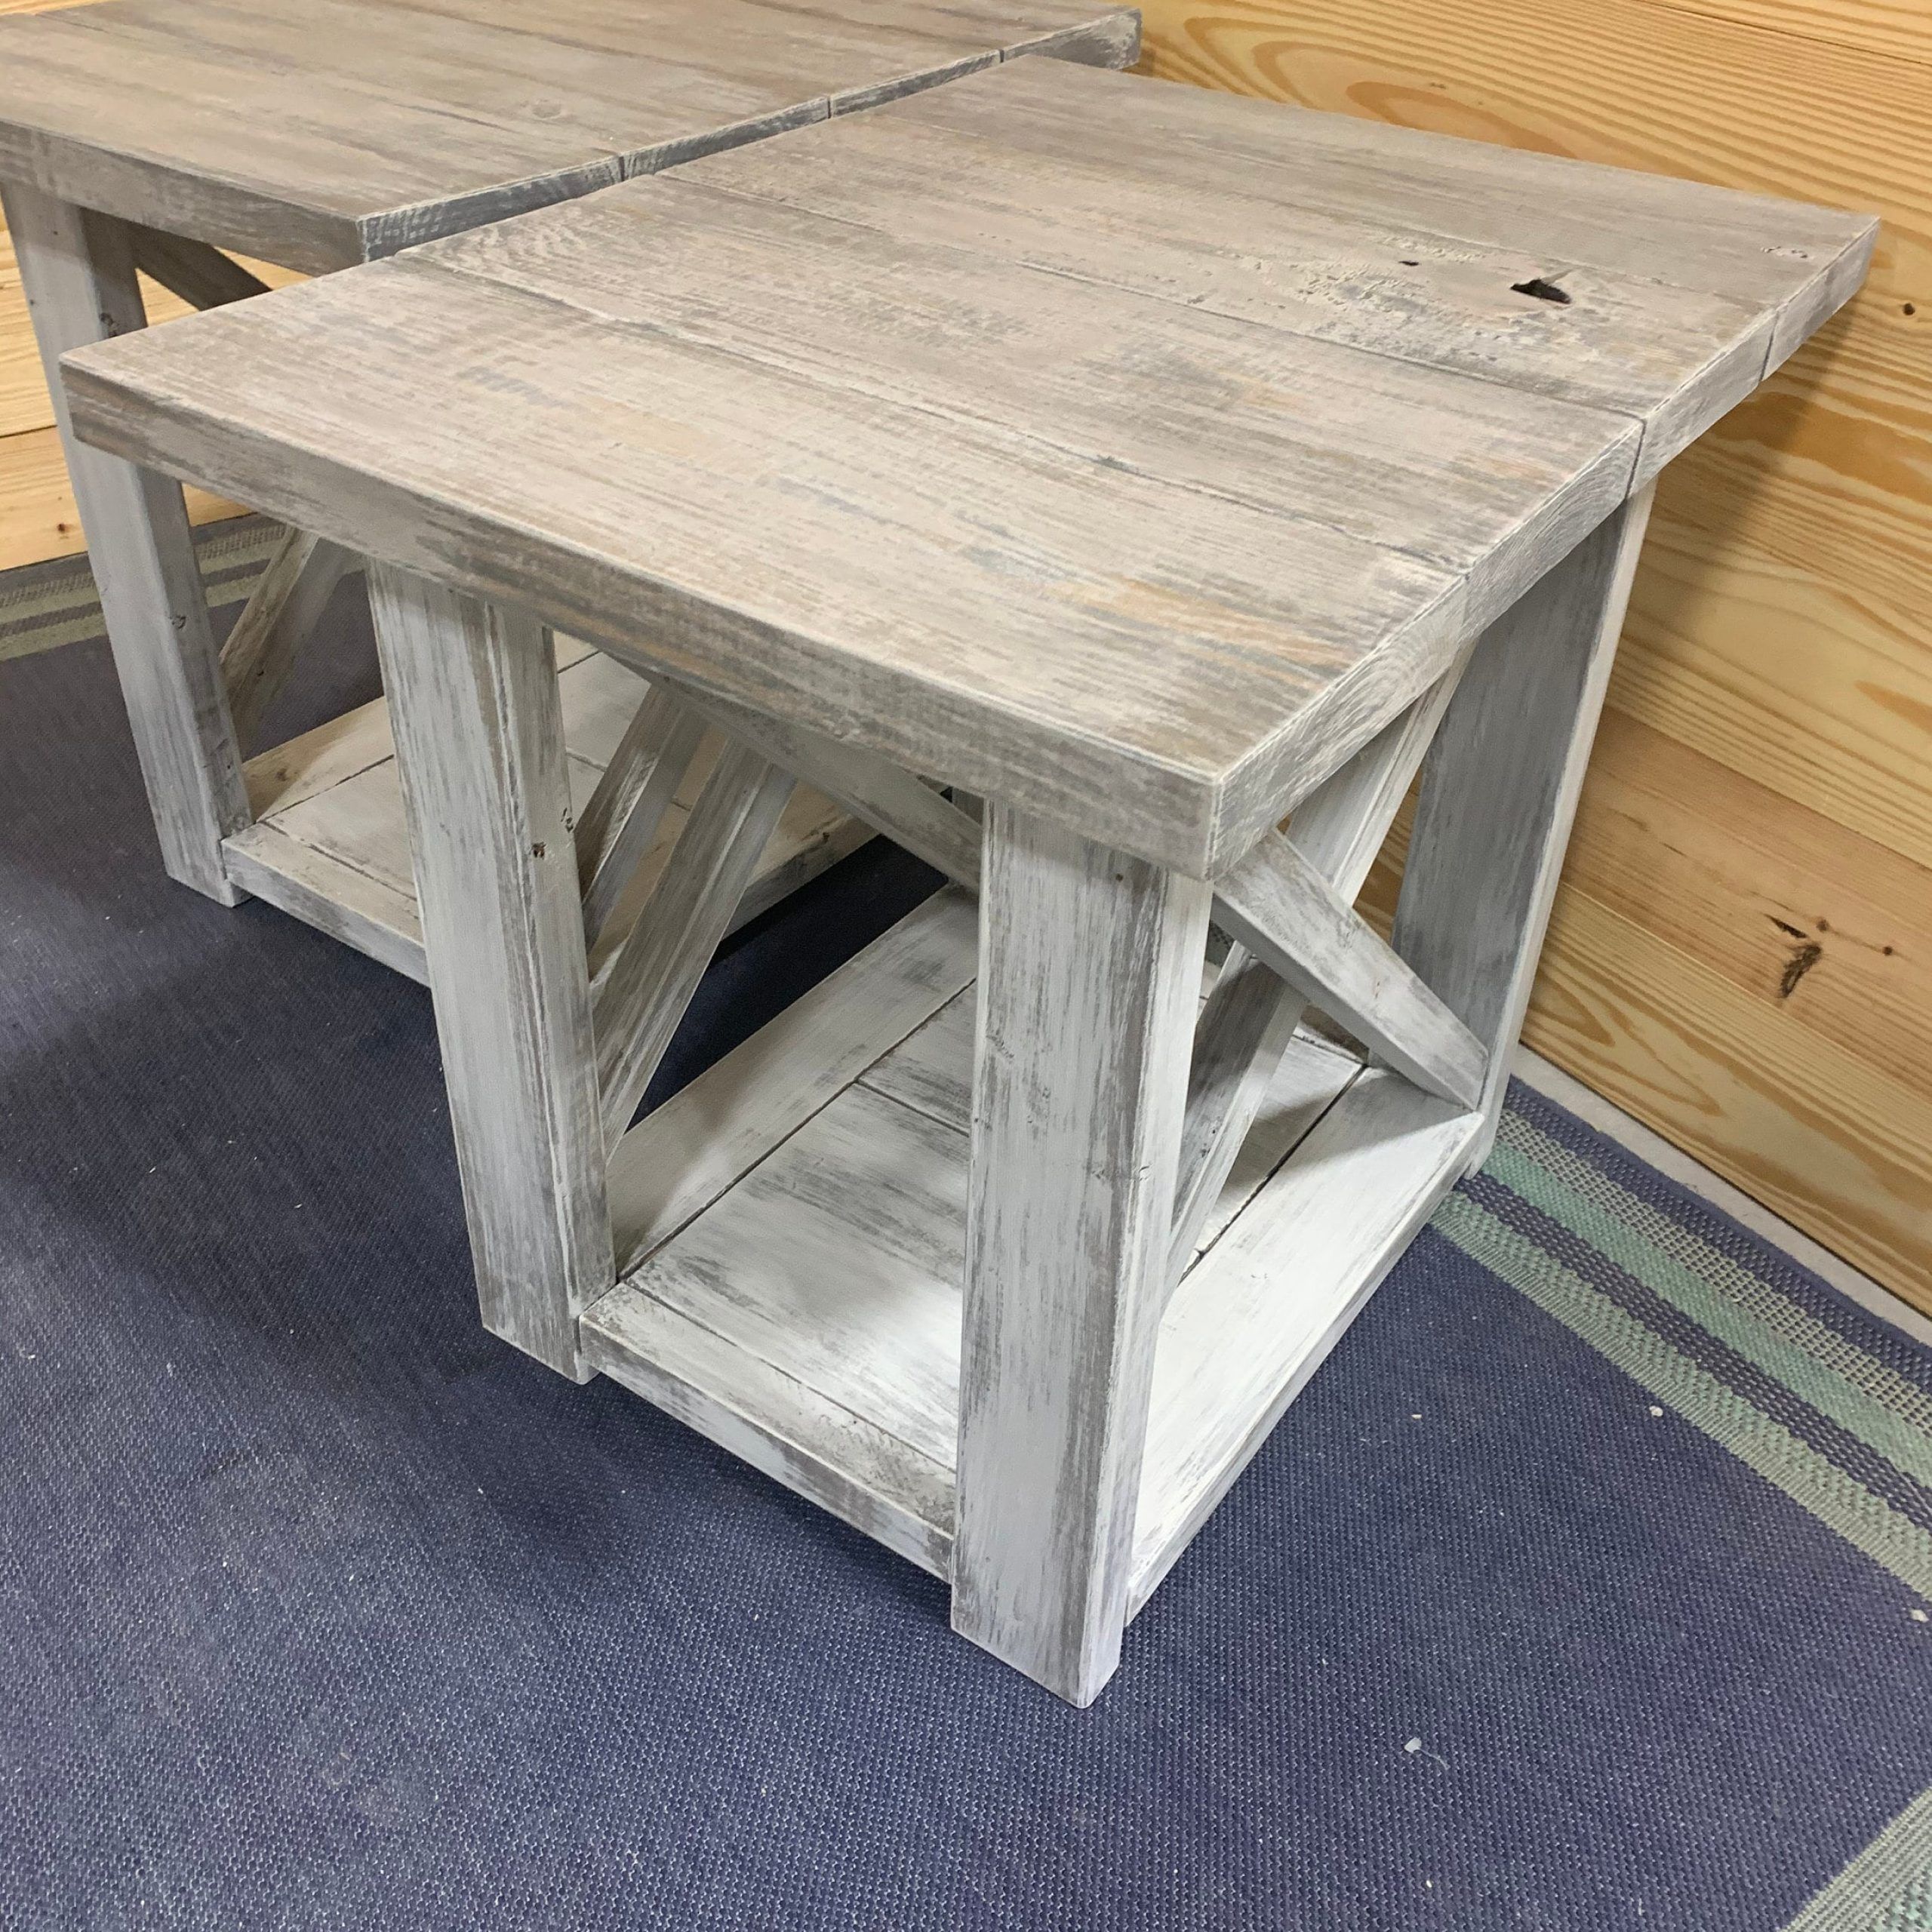 Long Rustic Farmhouse End Tables Gray White Wash Top With A Distressed Regarding Rustic Gray End Tables (Gallery 4 of 20)